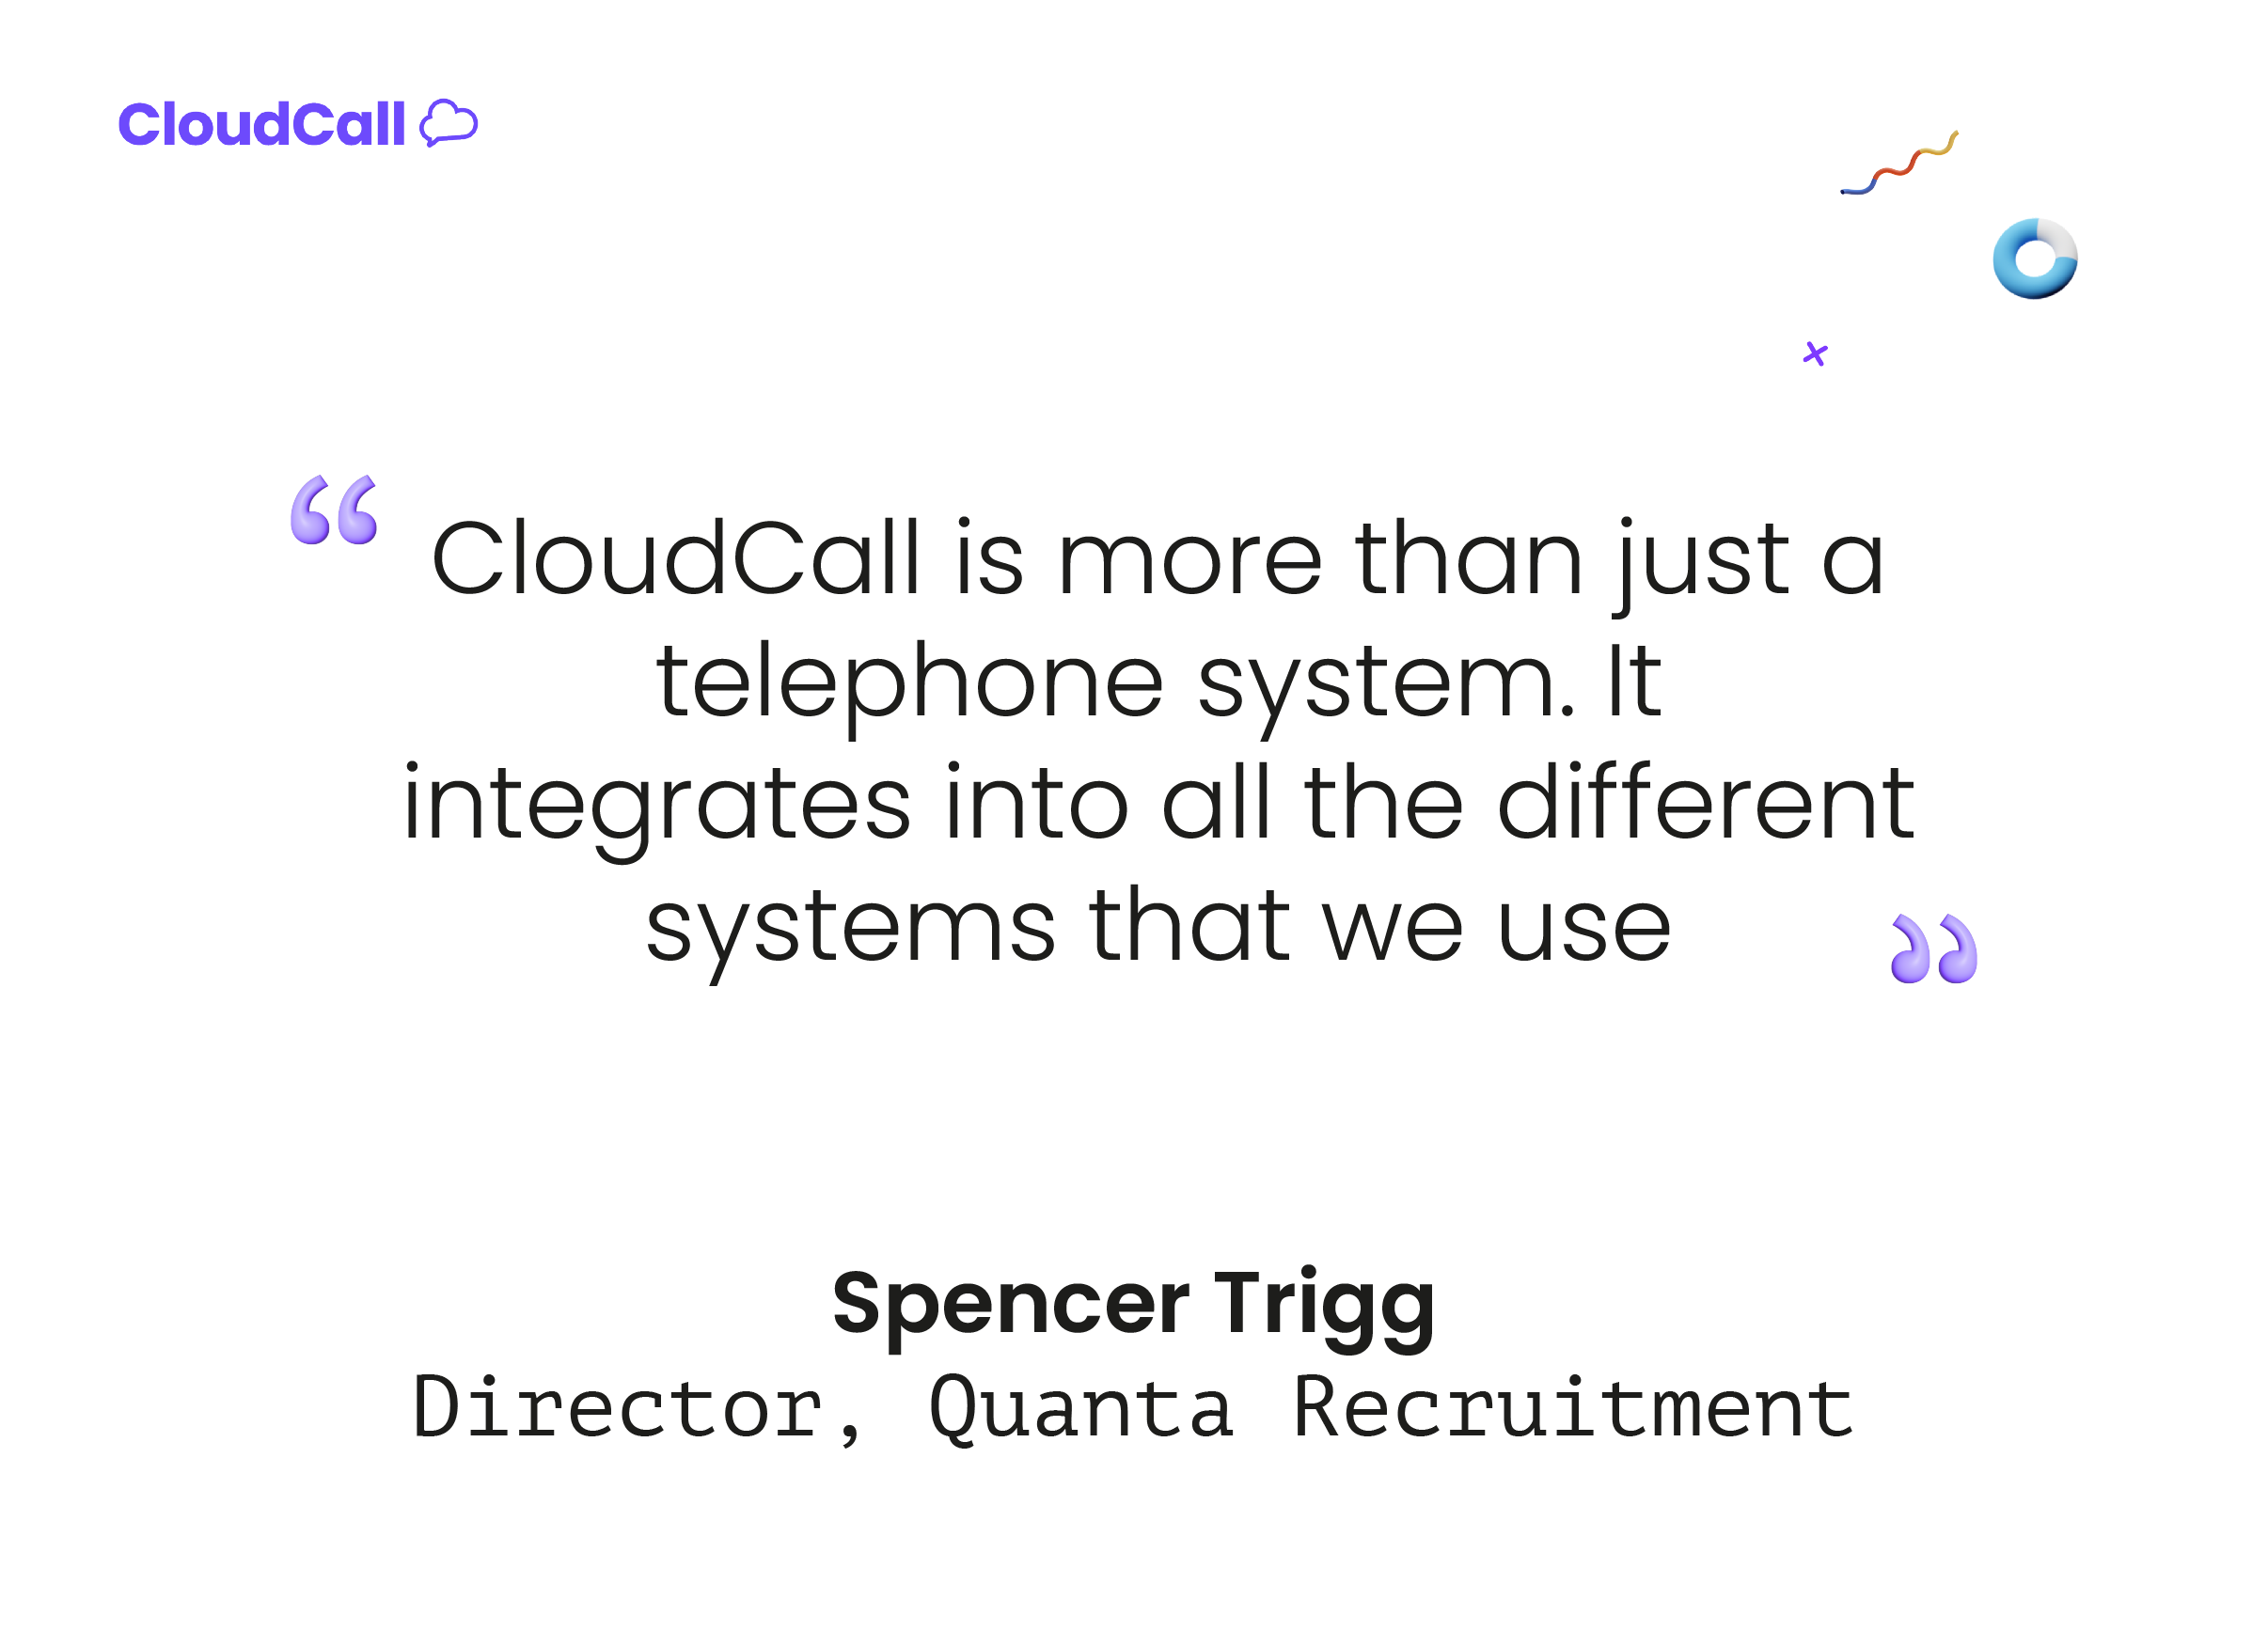 "CloudCall is more than just a telephony system. It integrated into all the different systems that we use" - Simon Trigg, Director, Quanta Recruitment